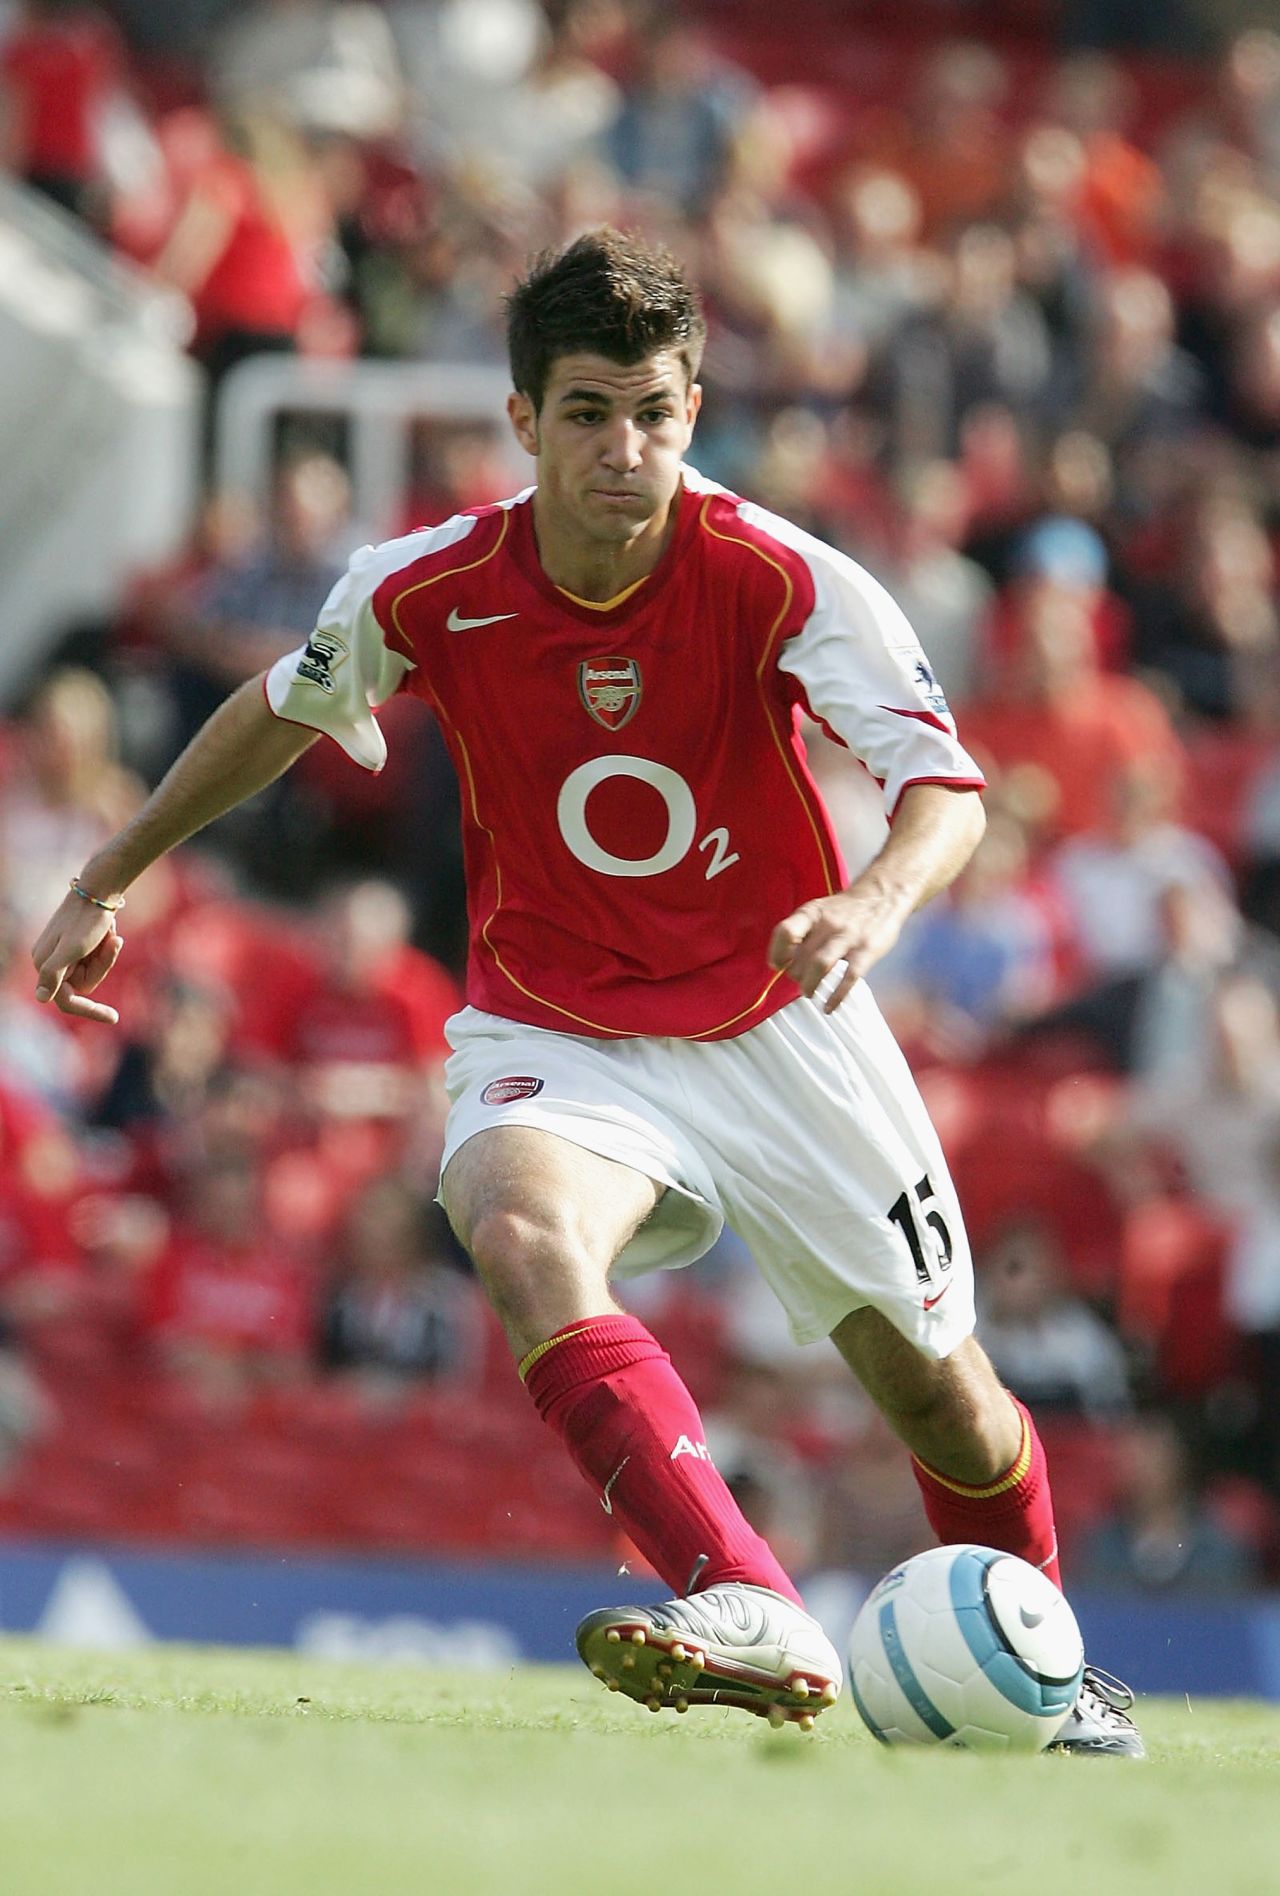 In 2003, Wenger debuted Fabregas at 16, still a team record, and started him in the 2006 UEFA Champions League final match against his home club Barcelona at 19. Fabregas went on to captain the Gunners during his eight-year spell in North London, before transferring to Barcelona for £28.9 million in 2011. Still only 30, Fabregas returned to London to play for arch-rivals Chelsea in 2014, where he recently notched a second Premier League title with the club. 